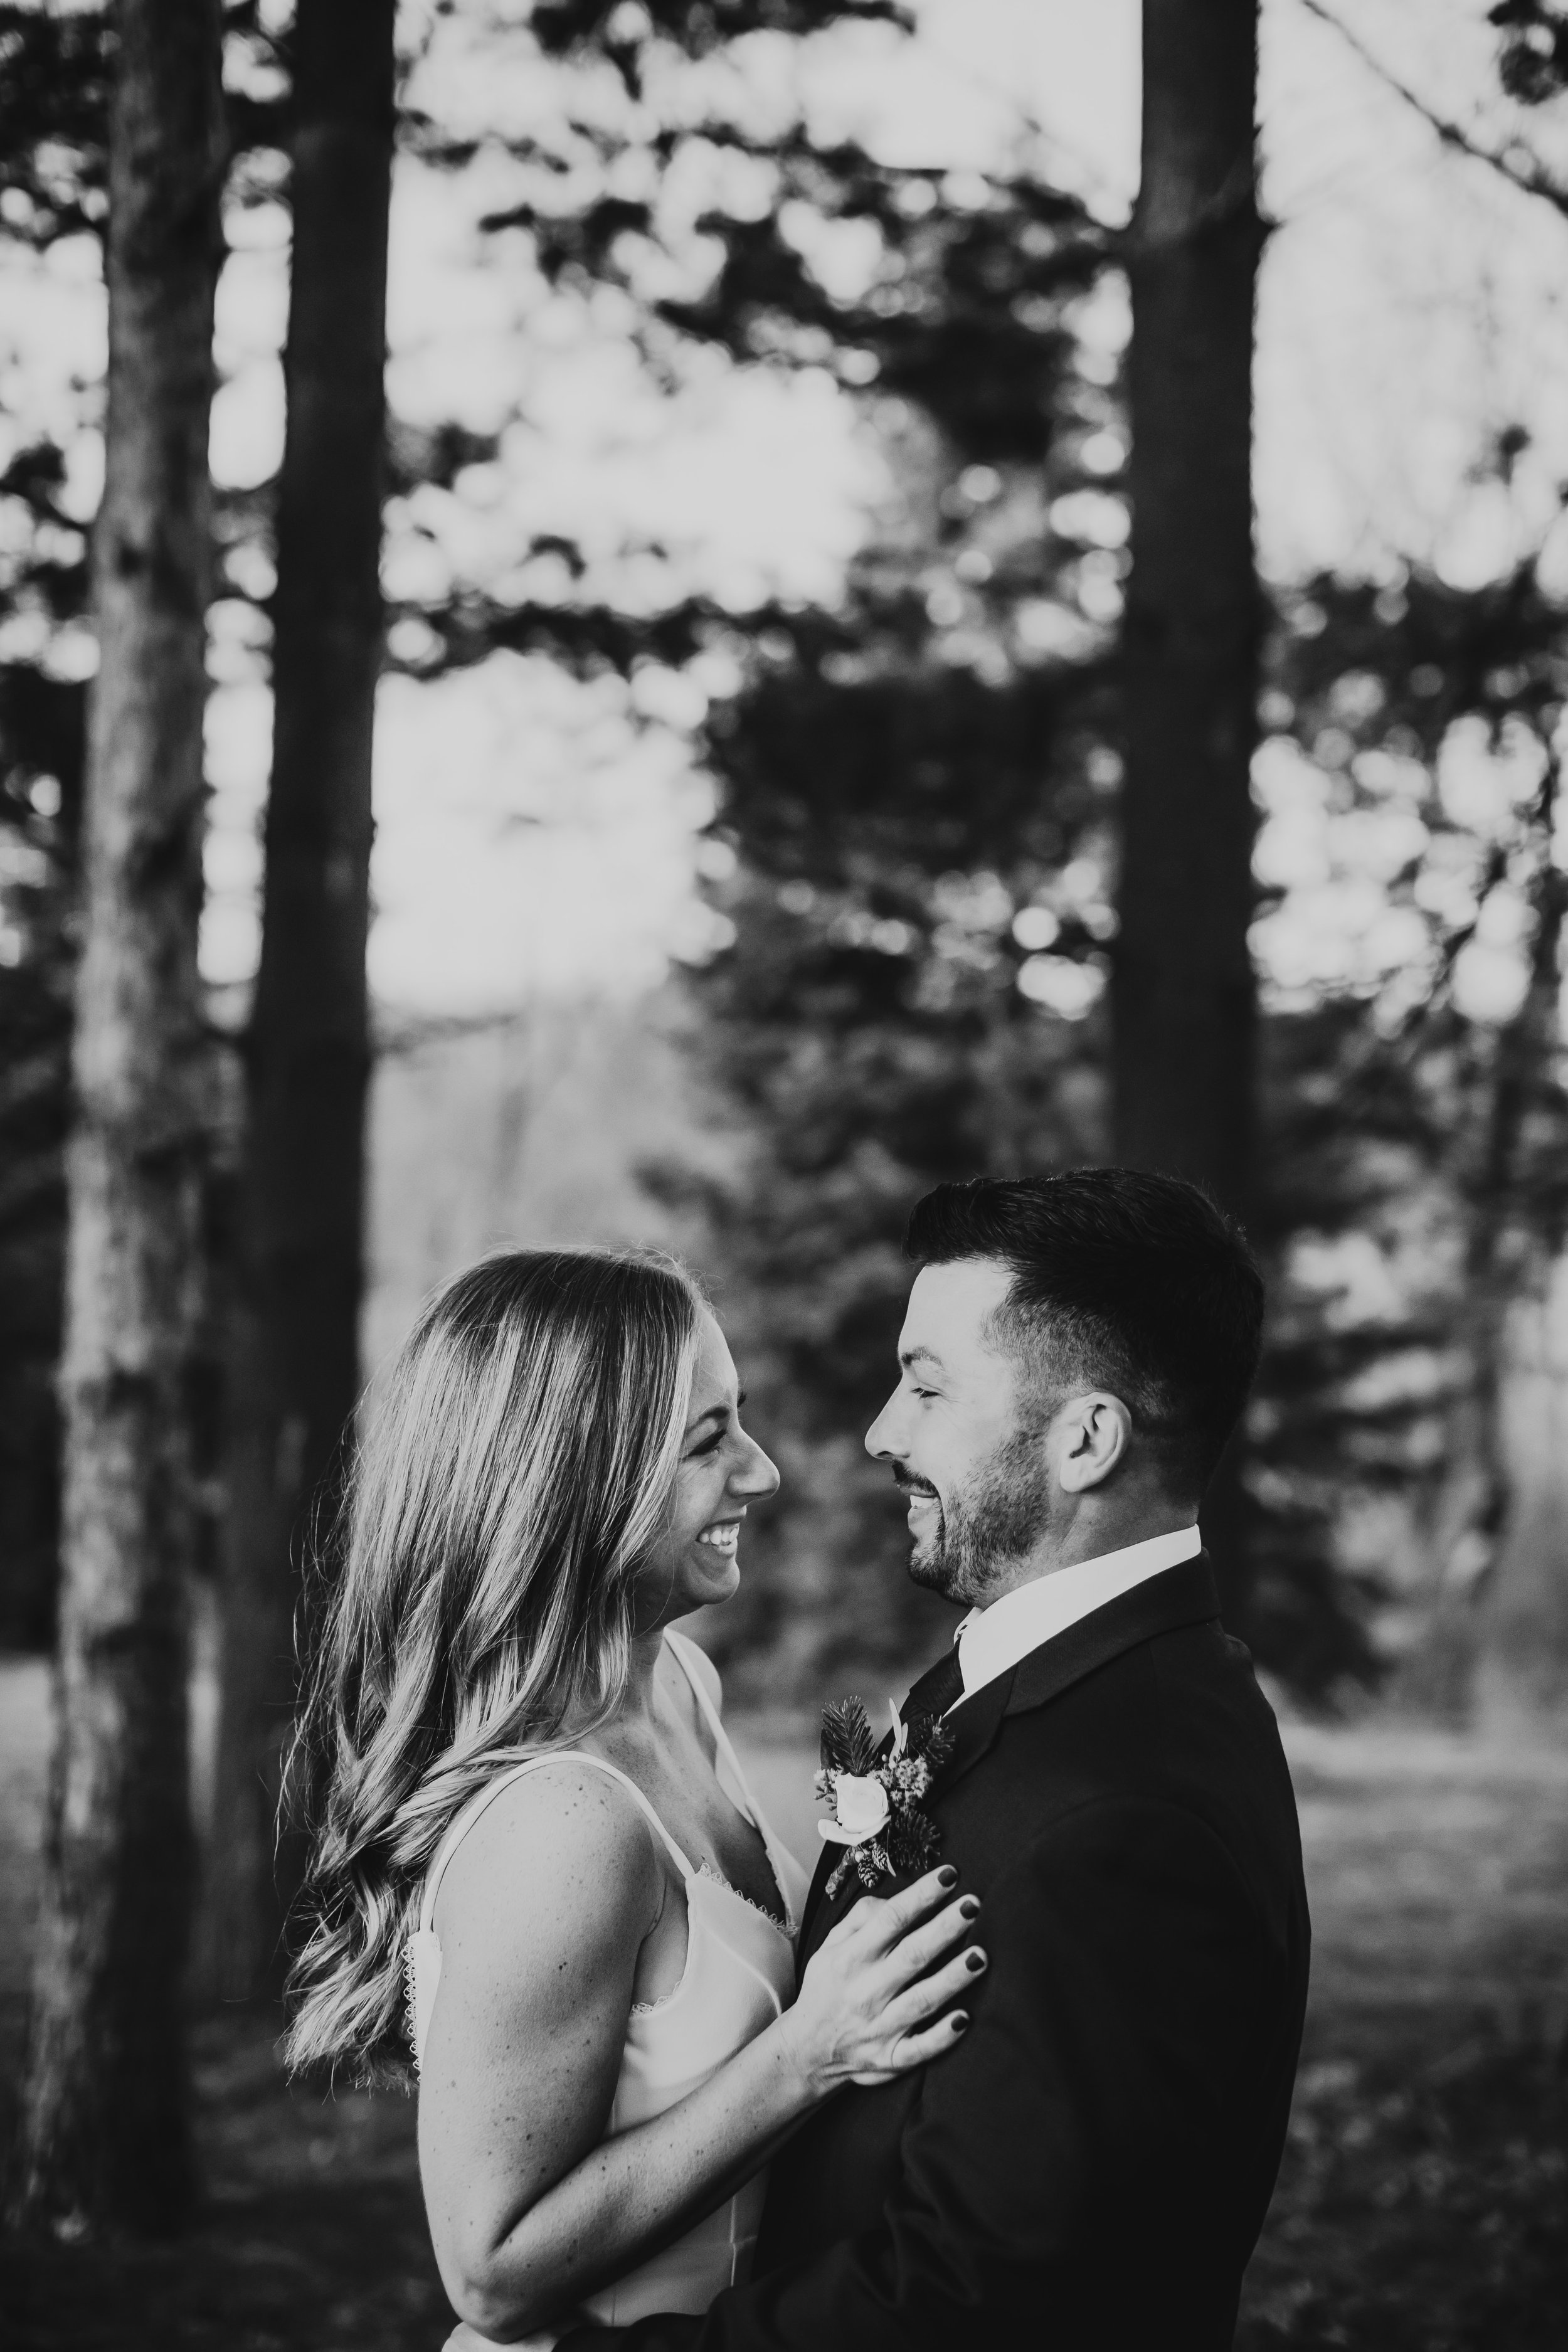  The bride and groom laugh while looking lovingly at one another by Teala Ward Photography. spaghetti strap wedding gown black suit IL weddings #tealawardphotography #tealawardweddings #LaSalleIllinois #IronwoodontheVermillion #weddingphotographyIL 